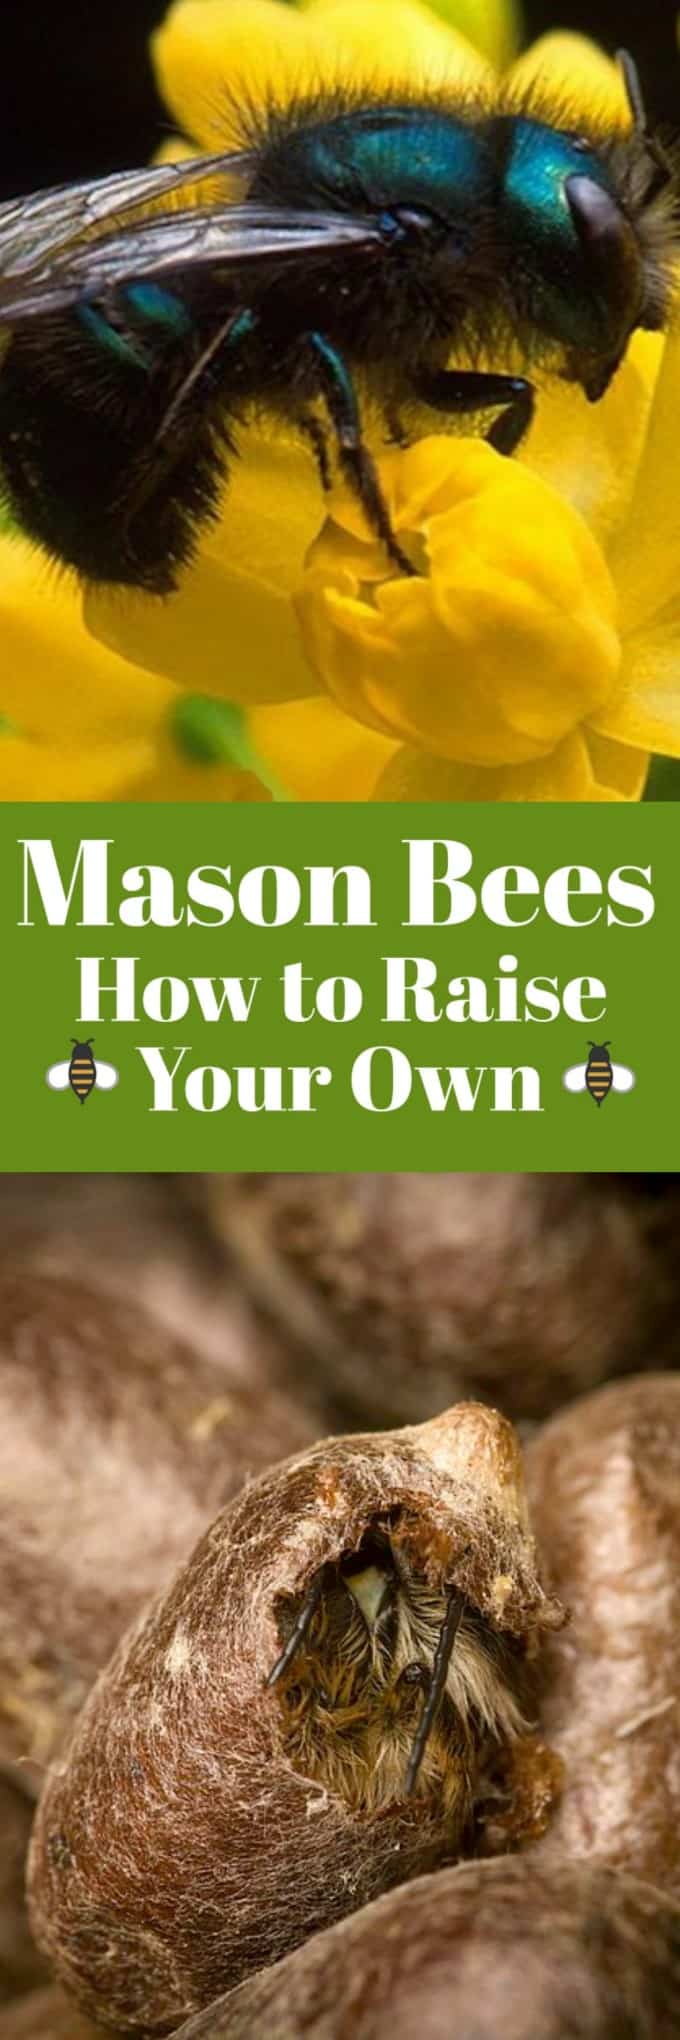 Mason Bees - How to Raise Your Own will help you with this fun hobby that helps our environment at the same time!! #masonbees #howtoraisebees